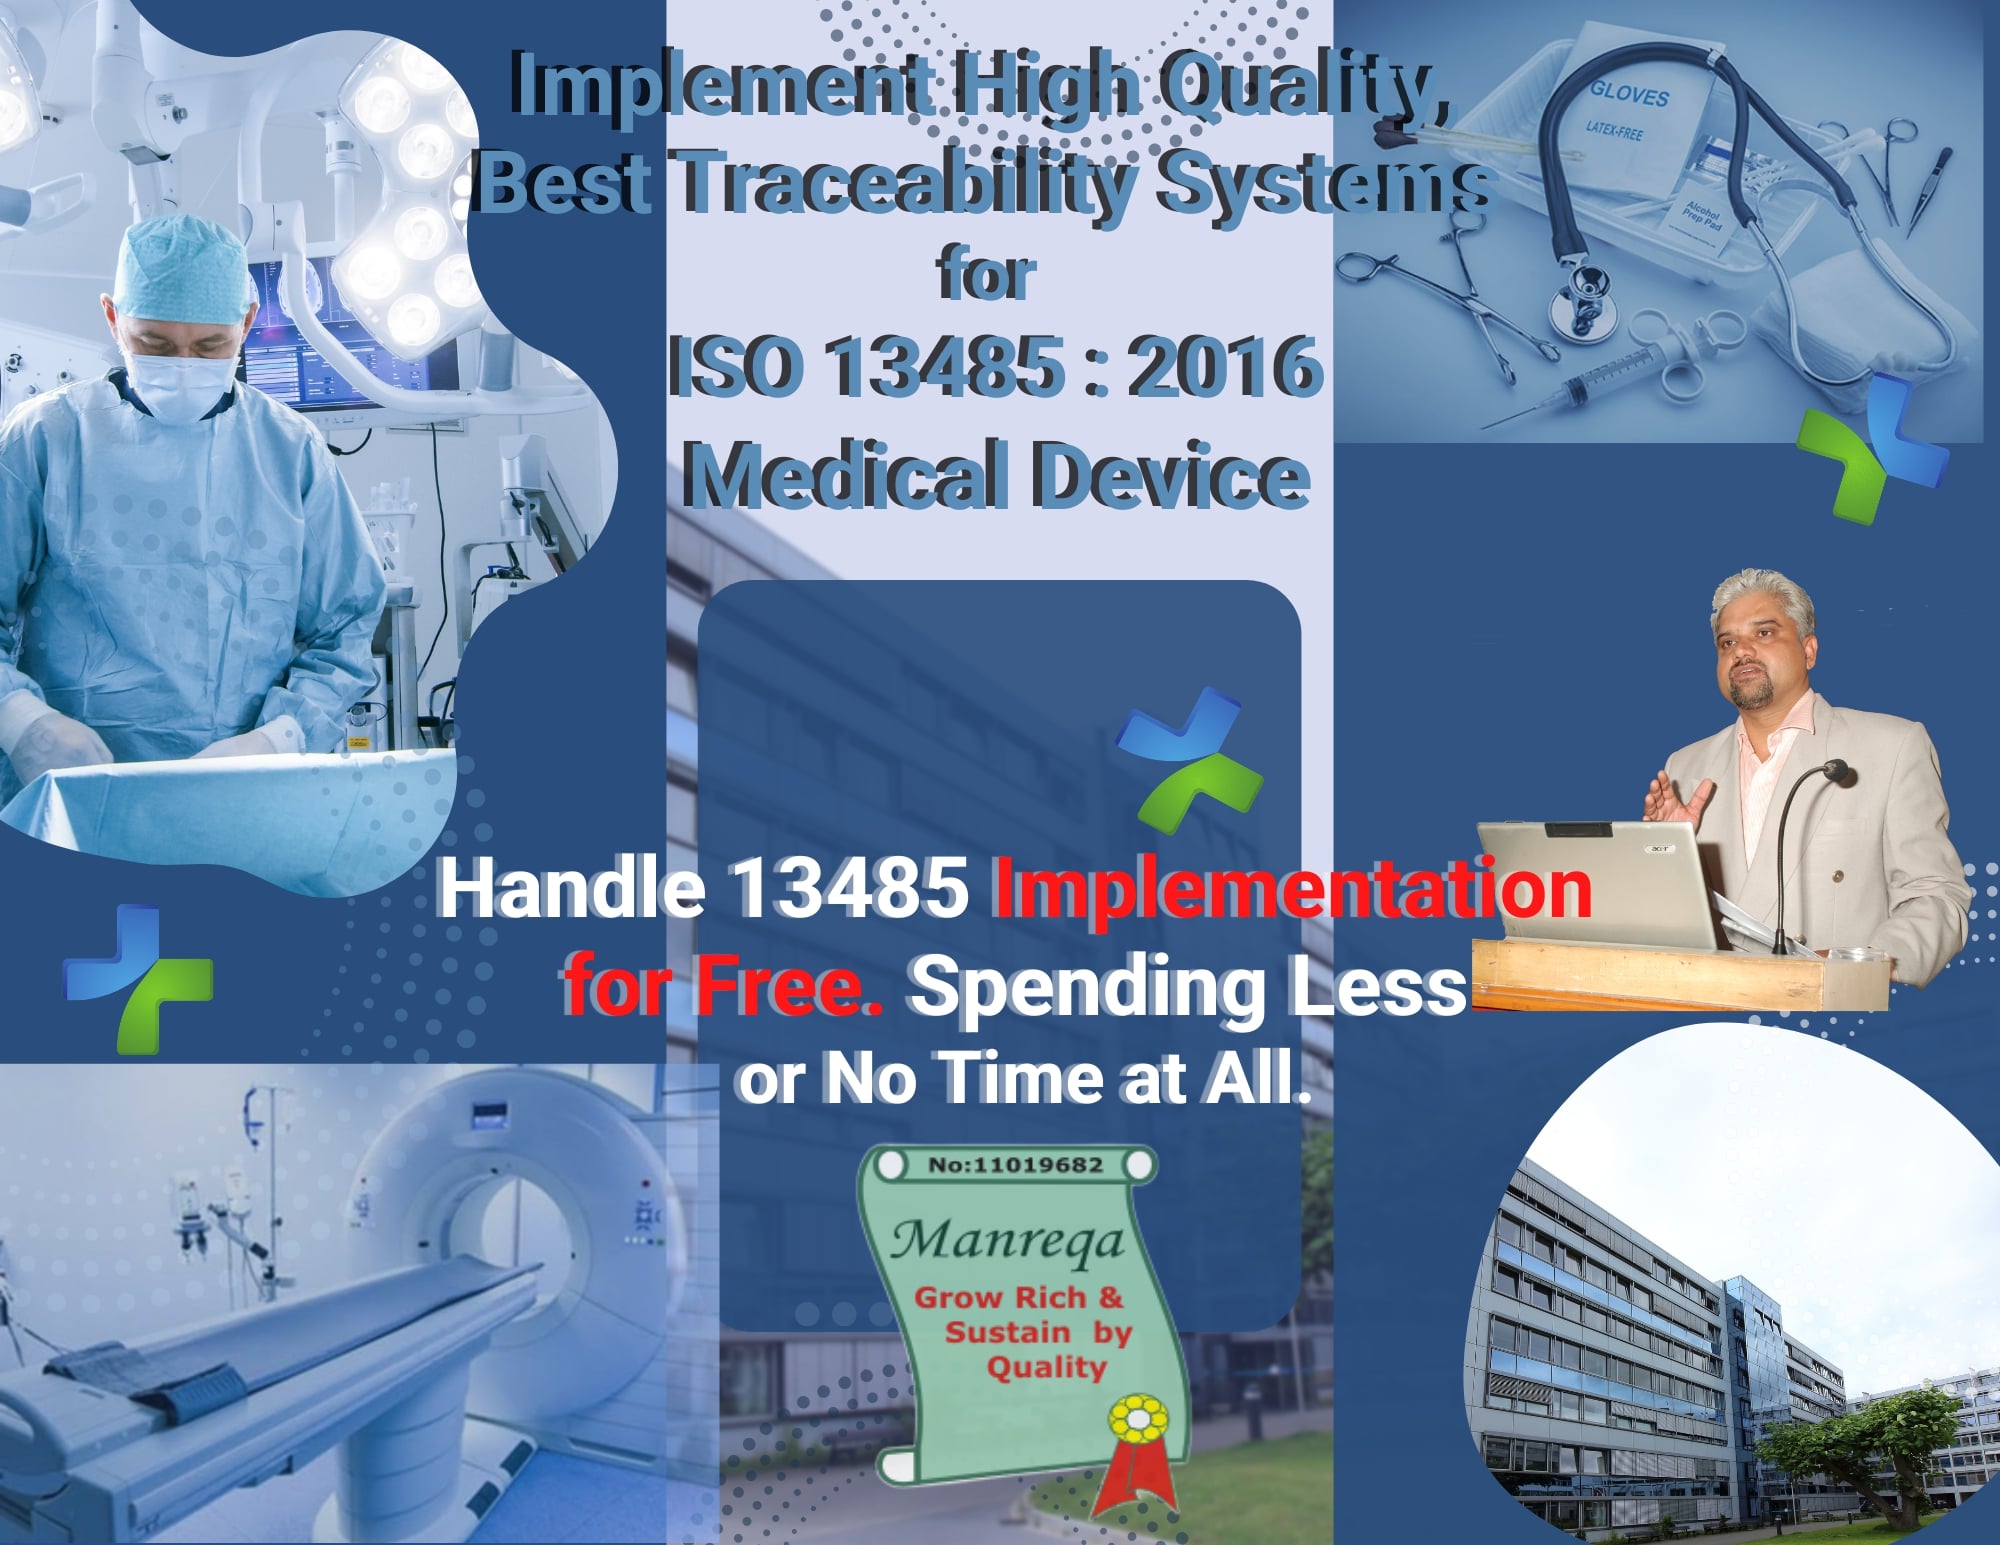 Handle 13485 Implementation for Free. Best Traceability Systems for Medical Device 